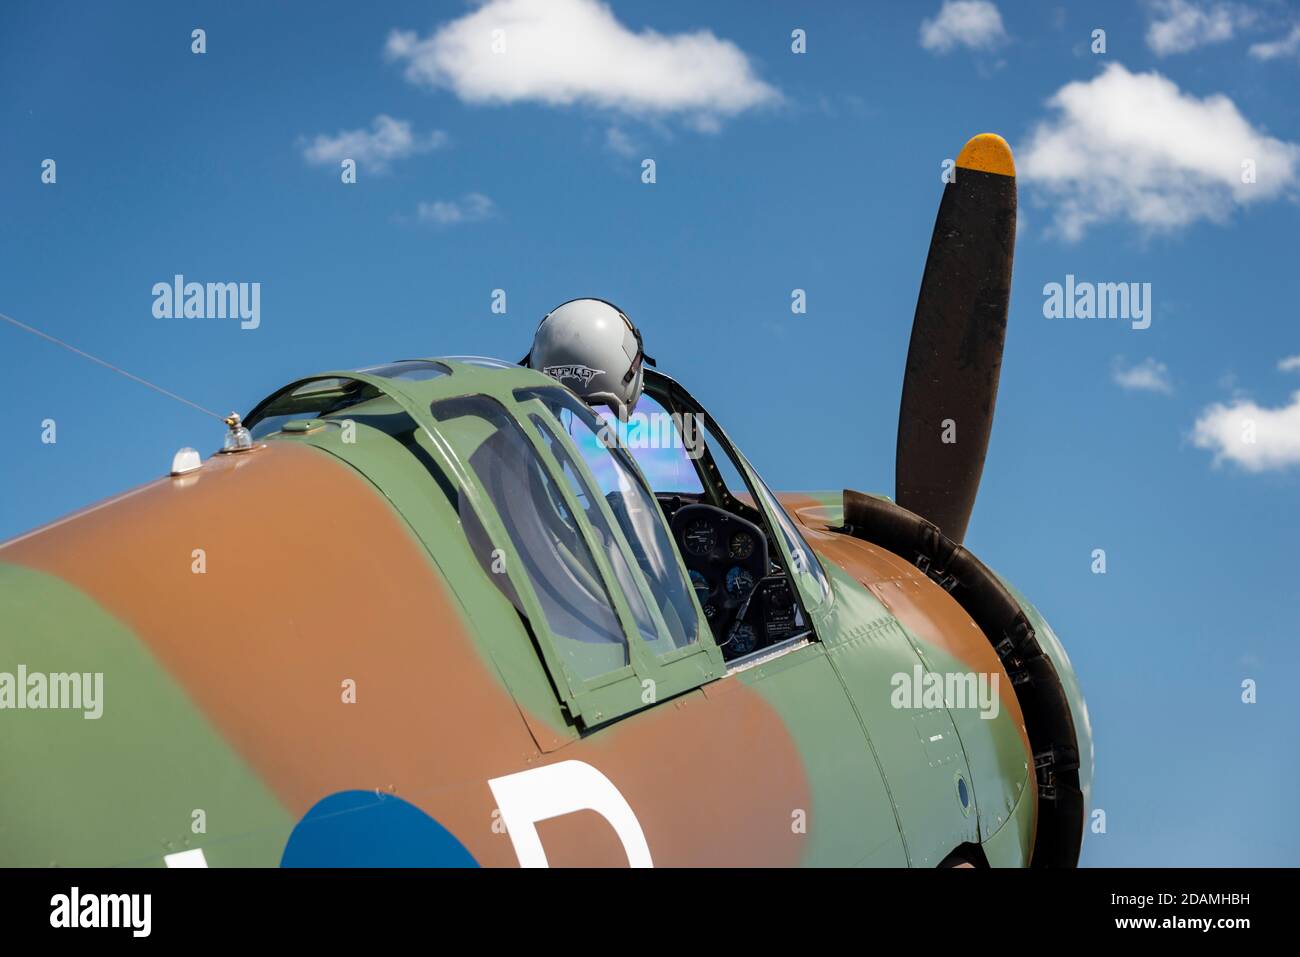 World War 2 aircraft on static display with the cockpit open and a flight helmet. Camoflague paint against a blue sky with a few clouds Stock Photo